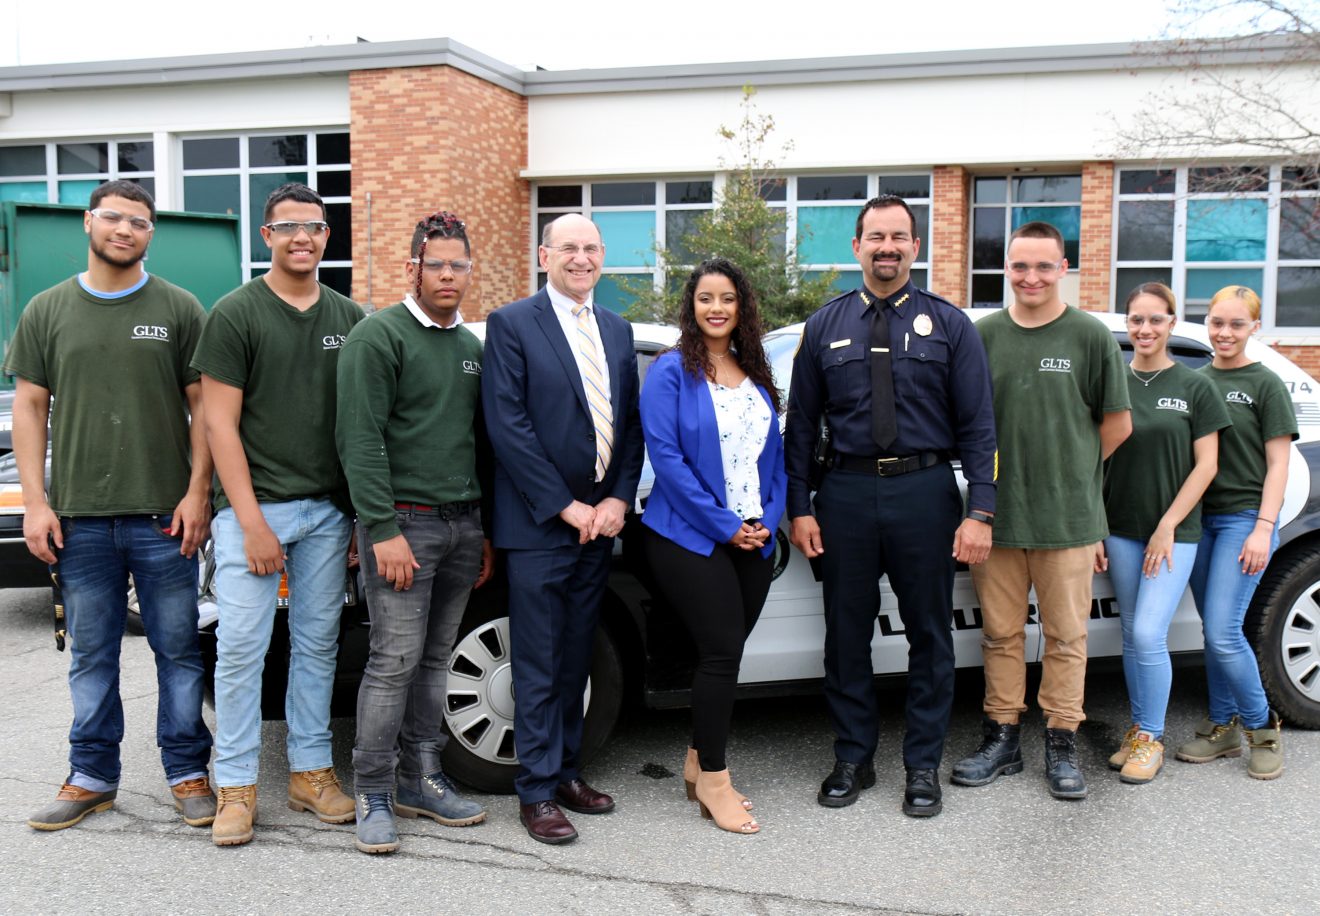 GLTS Students Restore Fleet of Lawrence Police Cruisers